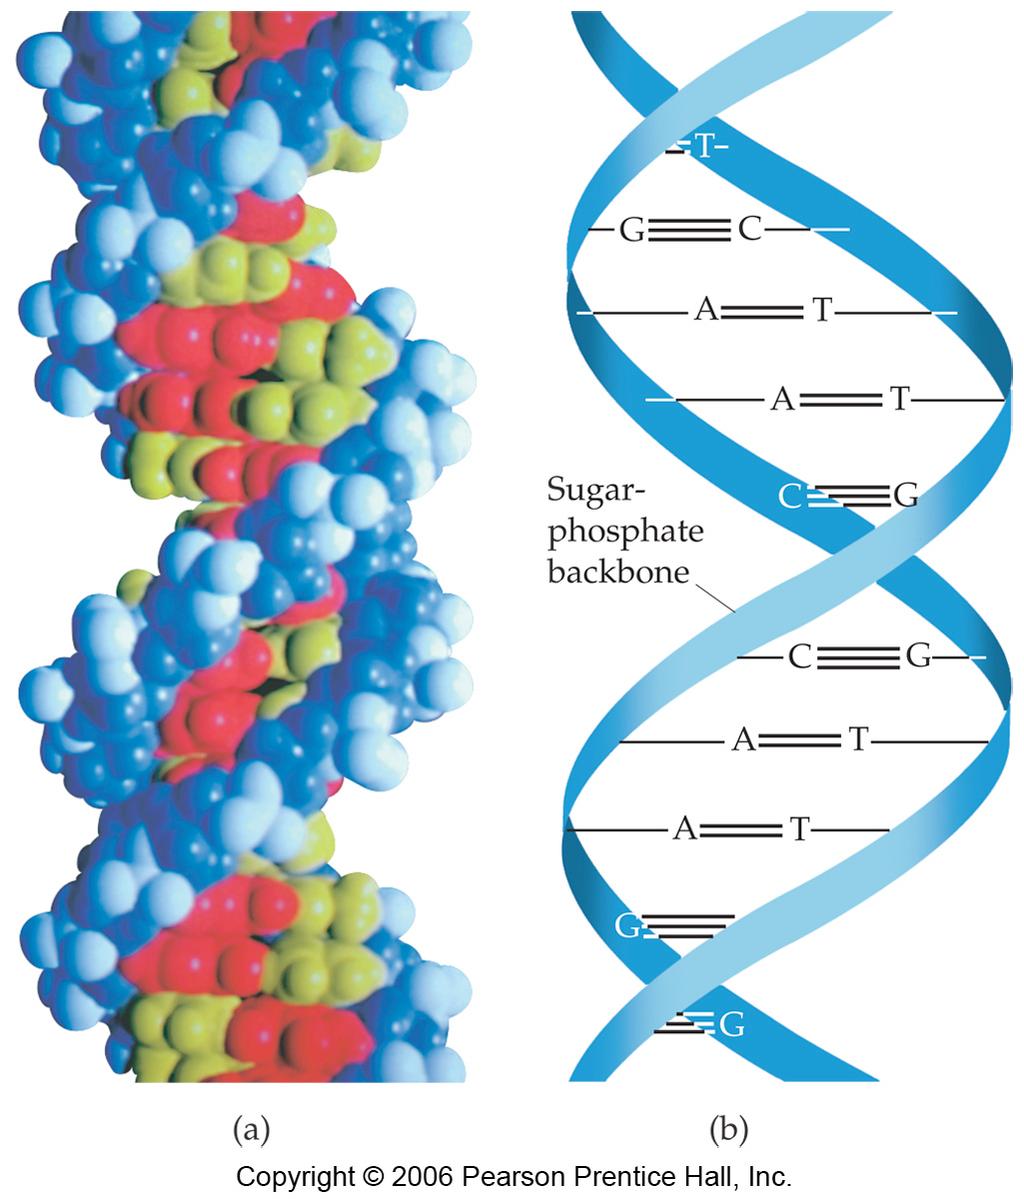 Nucleic Acids Nucleotides combine to form the